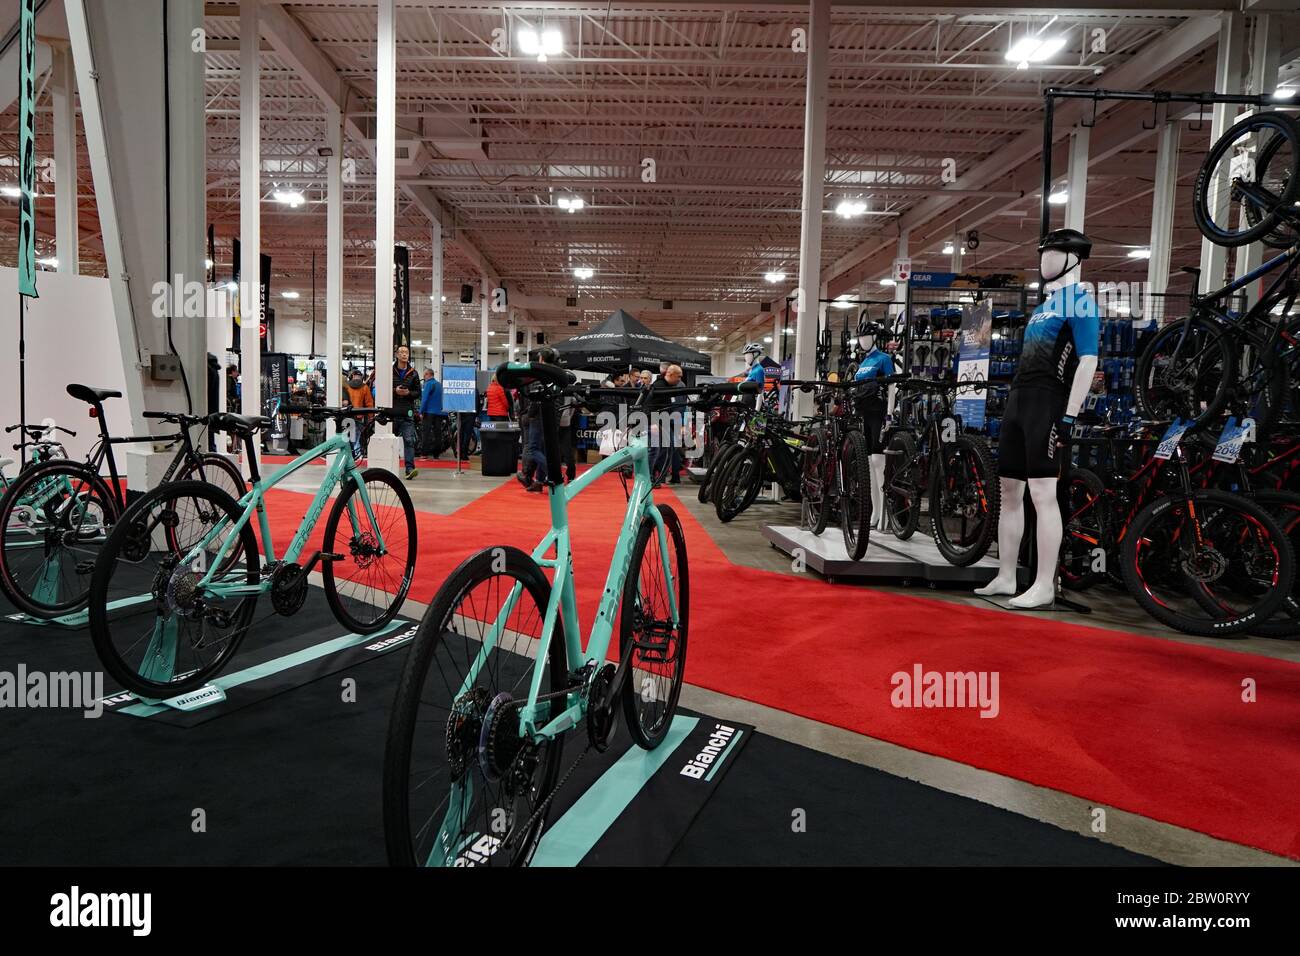 TORONTO - MARCH 6, 2020: Cycling is an increasingly popular form of exercise and bicycle shows offering high end bikes attract large crowds. Stock Photo